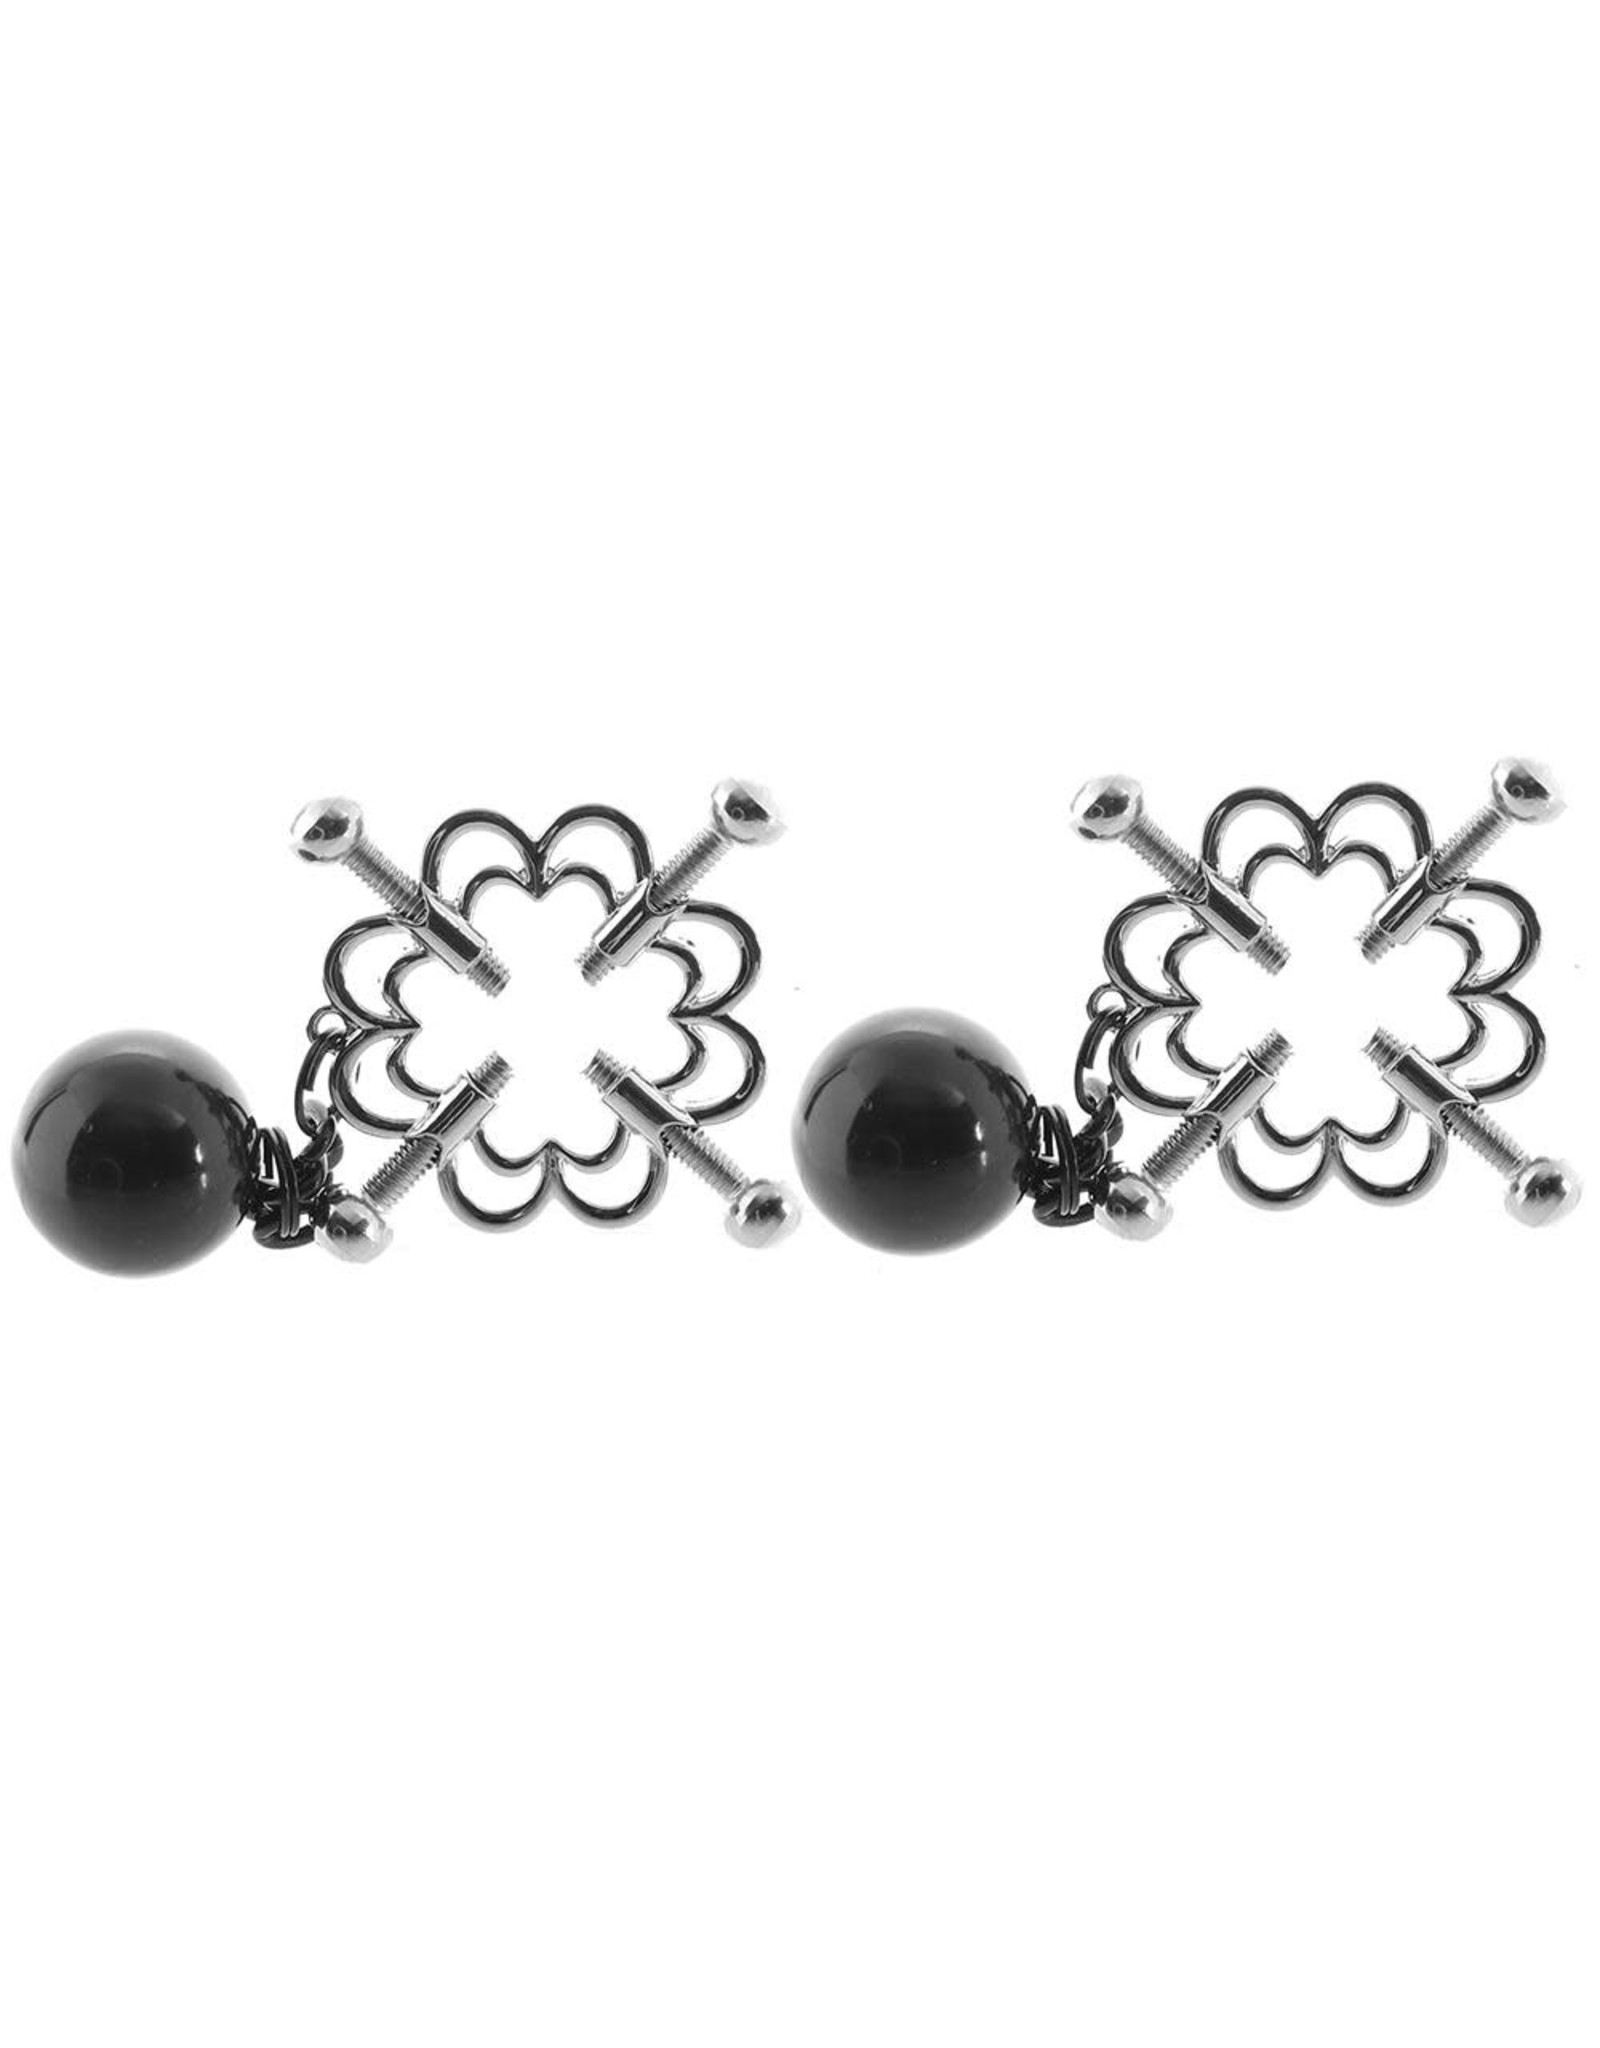 Calexotics Nipple Grips - 4-Point Weighted Nipple Press